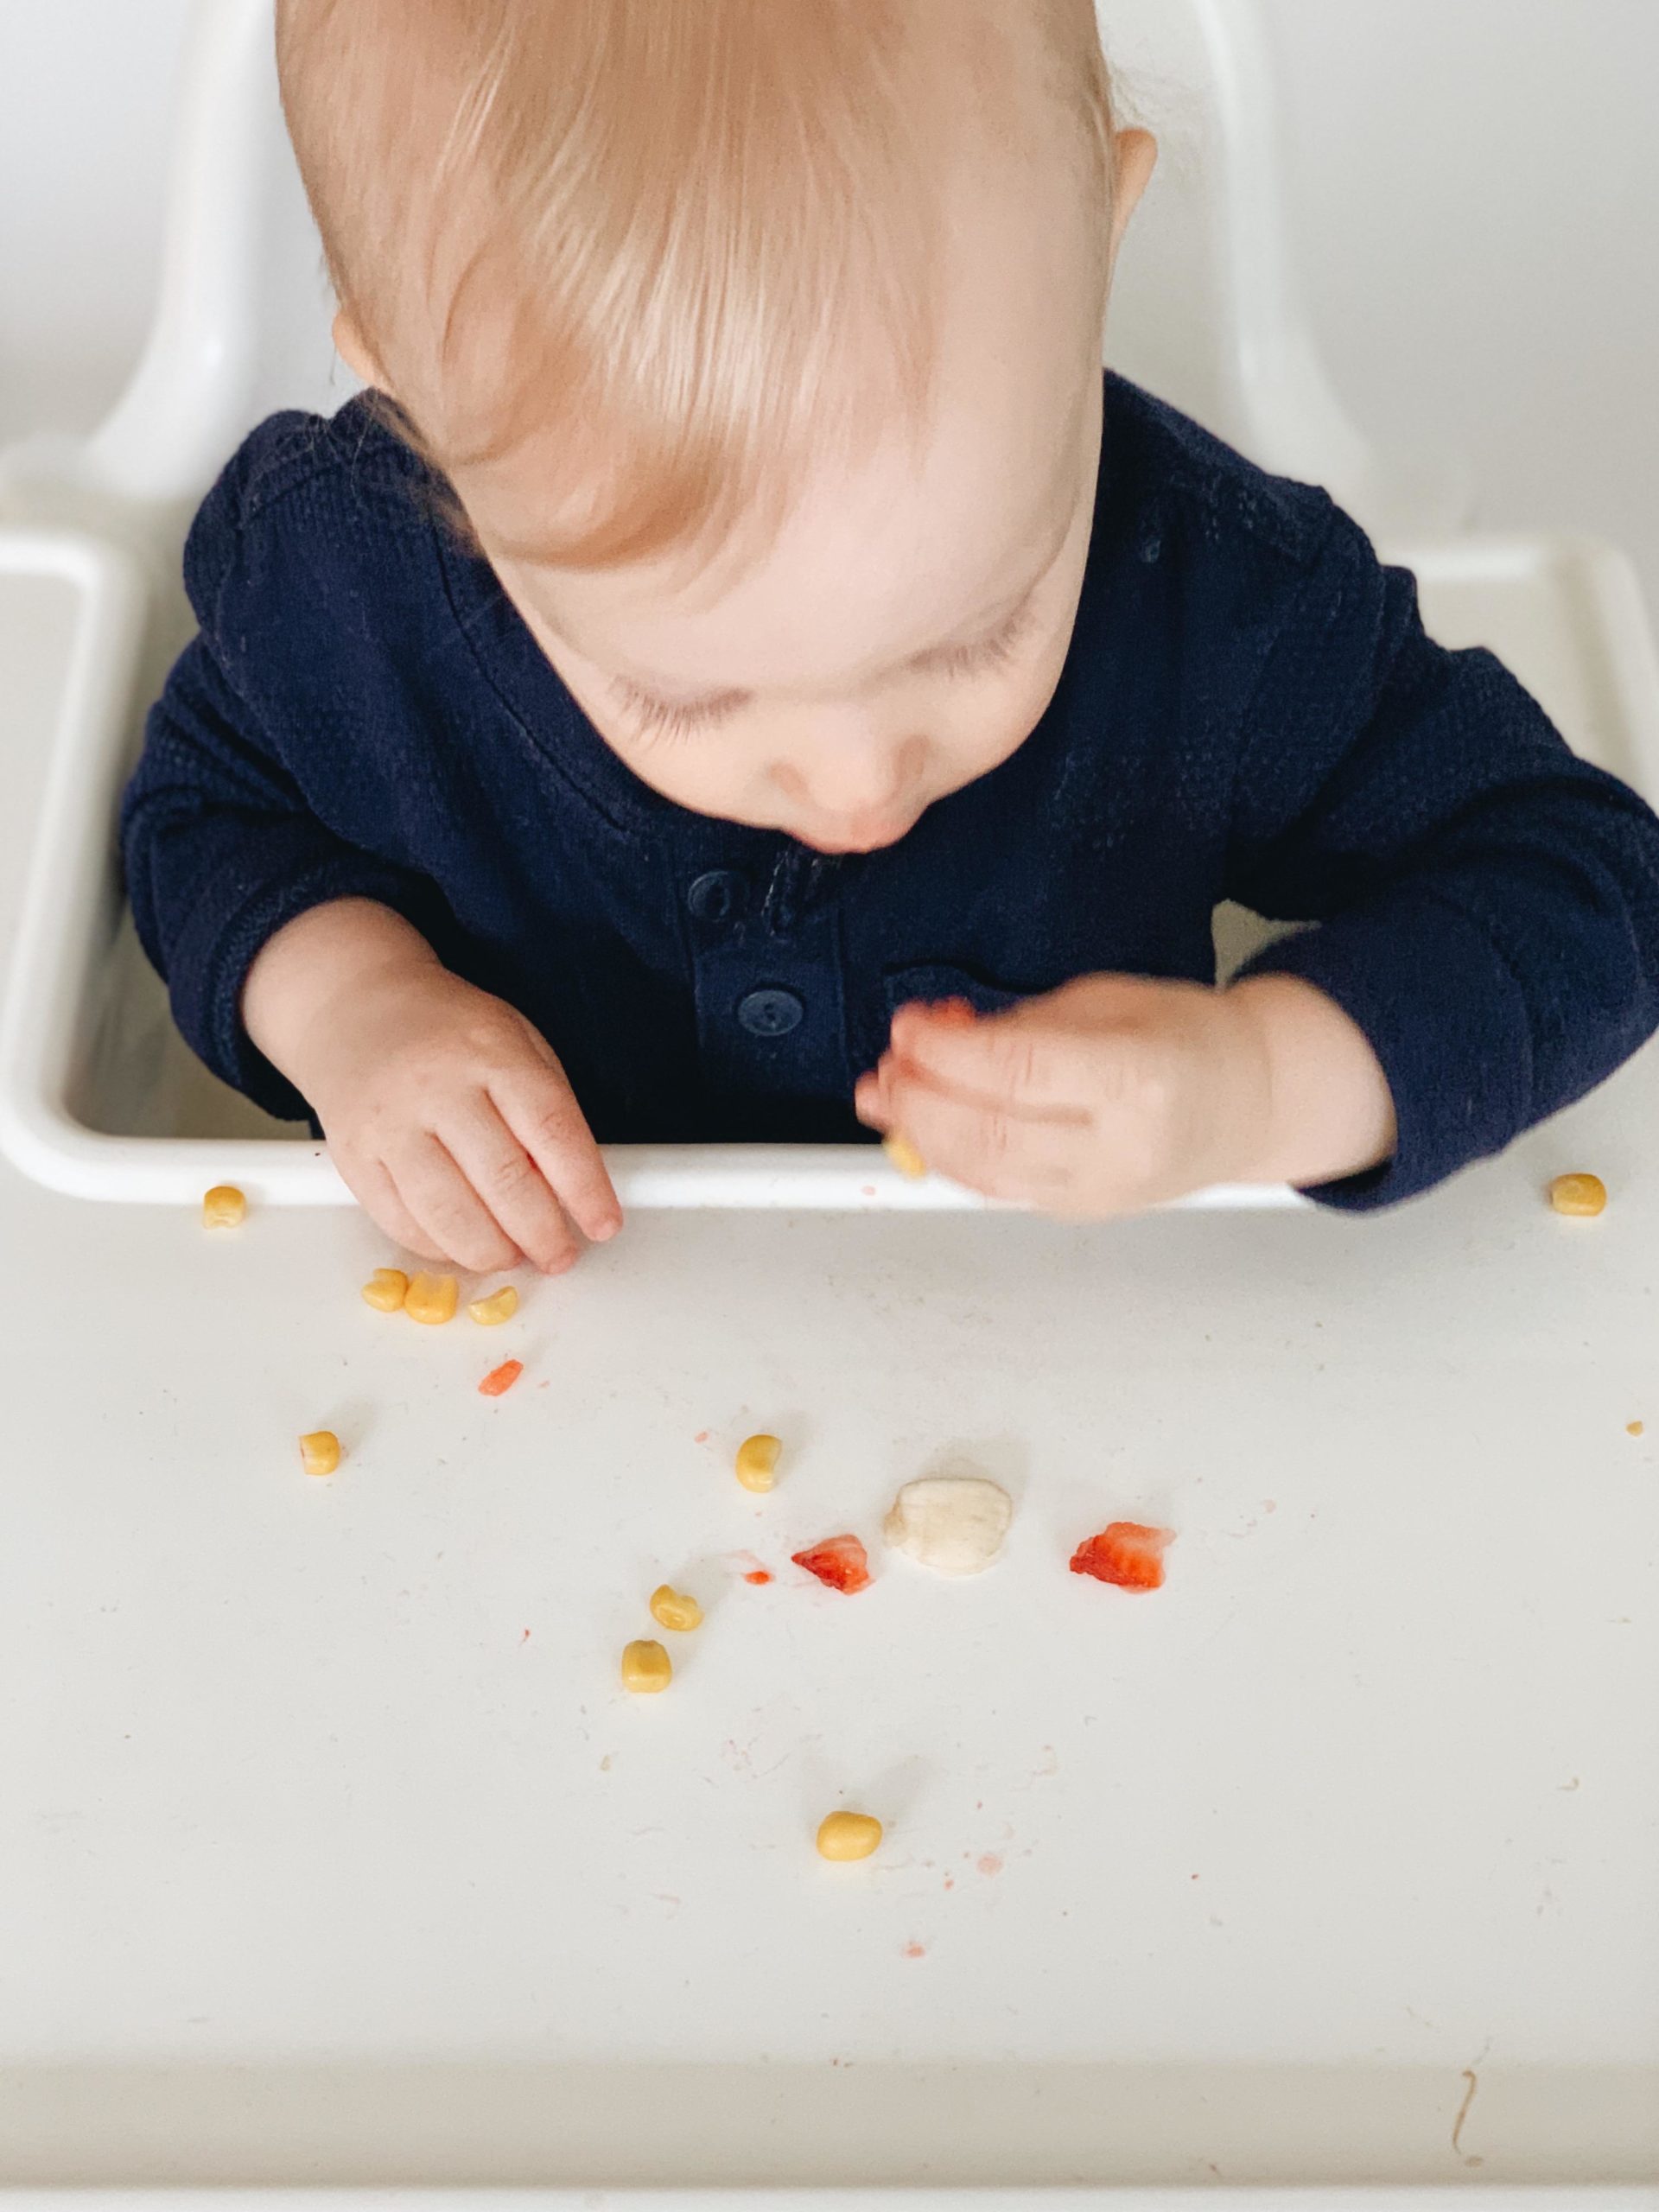 Baby Led Weaning Gear - This FamiLee